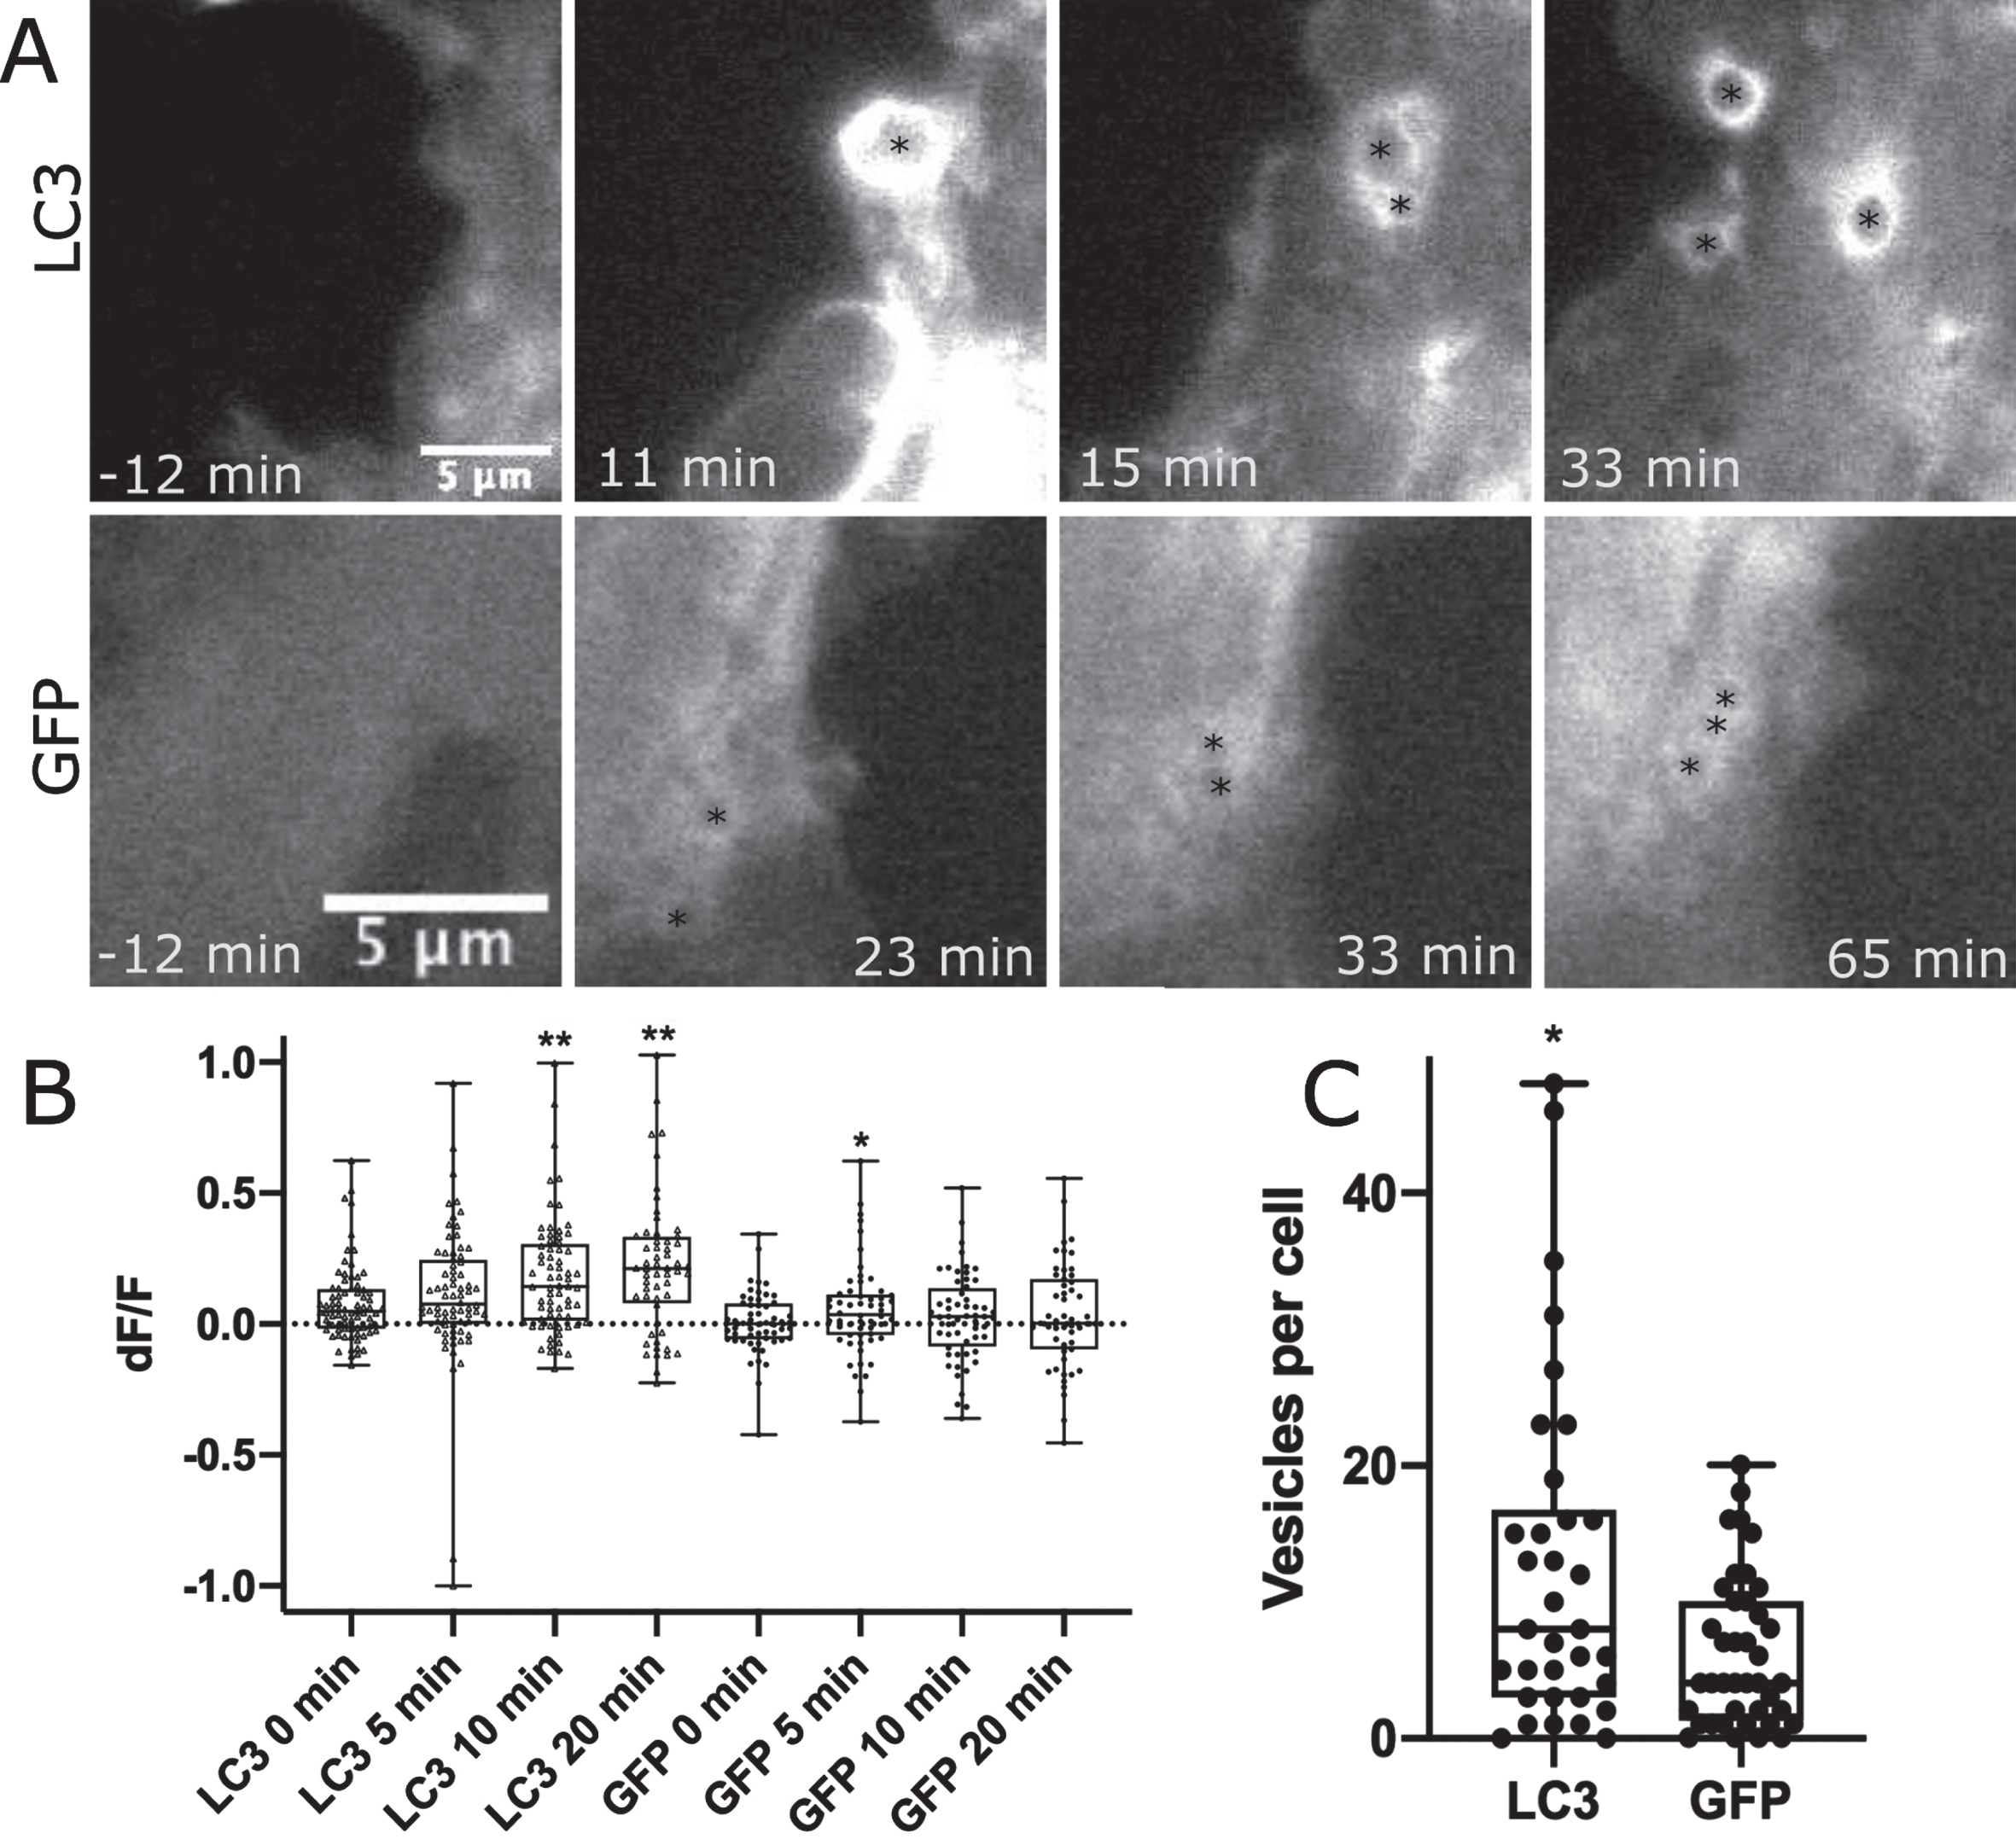 Phagocytic vesicles in WT astrocytes recruit GFP-LC3. GFP vs. GFP-LC3 kinetics in astrocytes during phagocytic vesicle formation and maturation. A) Highlight of phagocytic vesicle formation in astrocytes transiently labeled with GFP-LC3 and GFP control. We observe a large increase in GFP-LC3 localization surrounding phagocytic vesicles as depicted in the top row, and a smaller increase in GFP localization displayed in the bottom row. Black asterisks mark the position of phagocytic vesicles that form in astrocytes responding to photolysis. B) Quantification of GFP-LC3 and GFP signal associated with phagocytic vesicles at 0, 5, 10, and 20 min time points following vesicle formation. Box plot of change in fluorescence (dF/F) at four time points show a significant increase in fluorescence observed 10 and 20 min following vesicle formation for LC3 labeled astrocytes, peaking at 20 minutes post vesicle formation. GFP fluorescence peaked at 5 min following vesicle formation. * corresponds to p values 0.01–0.05. ** corresponds to p values < 0.01. C. GFP-LC3 transfected astrocytes produce significantly more vesicles per cell than GFP labeled astrocytes. GFP-LC3 transfected cells produce an average of 12.65 vesicles per cell (n = 34), significantly more than GFP labeled cells at an average of 6.2 vesicles per cell (n = 40). Data did not pass Anderson-Darling normality test, we used a Mann-Whitney two tailed unpaired test to determine a significant difference between GFP-LC3 and GFP by p = 0.024.